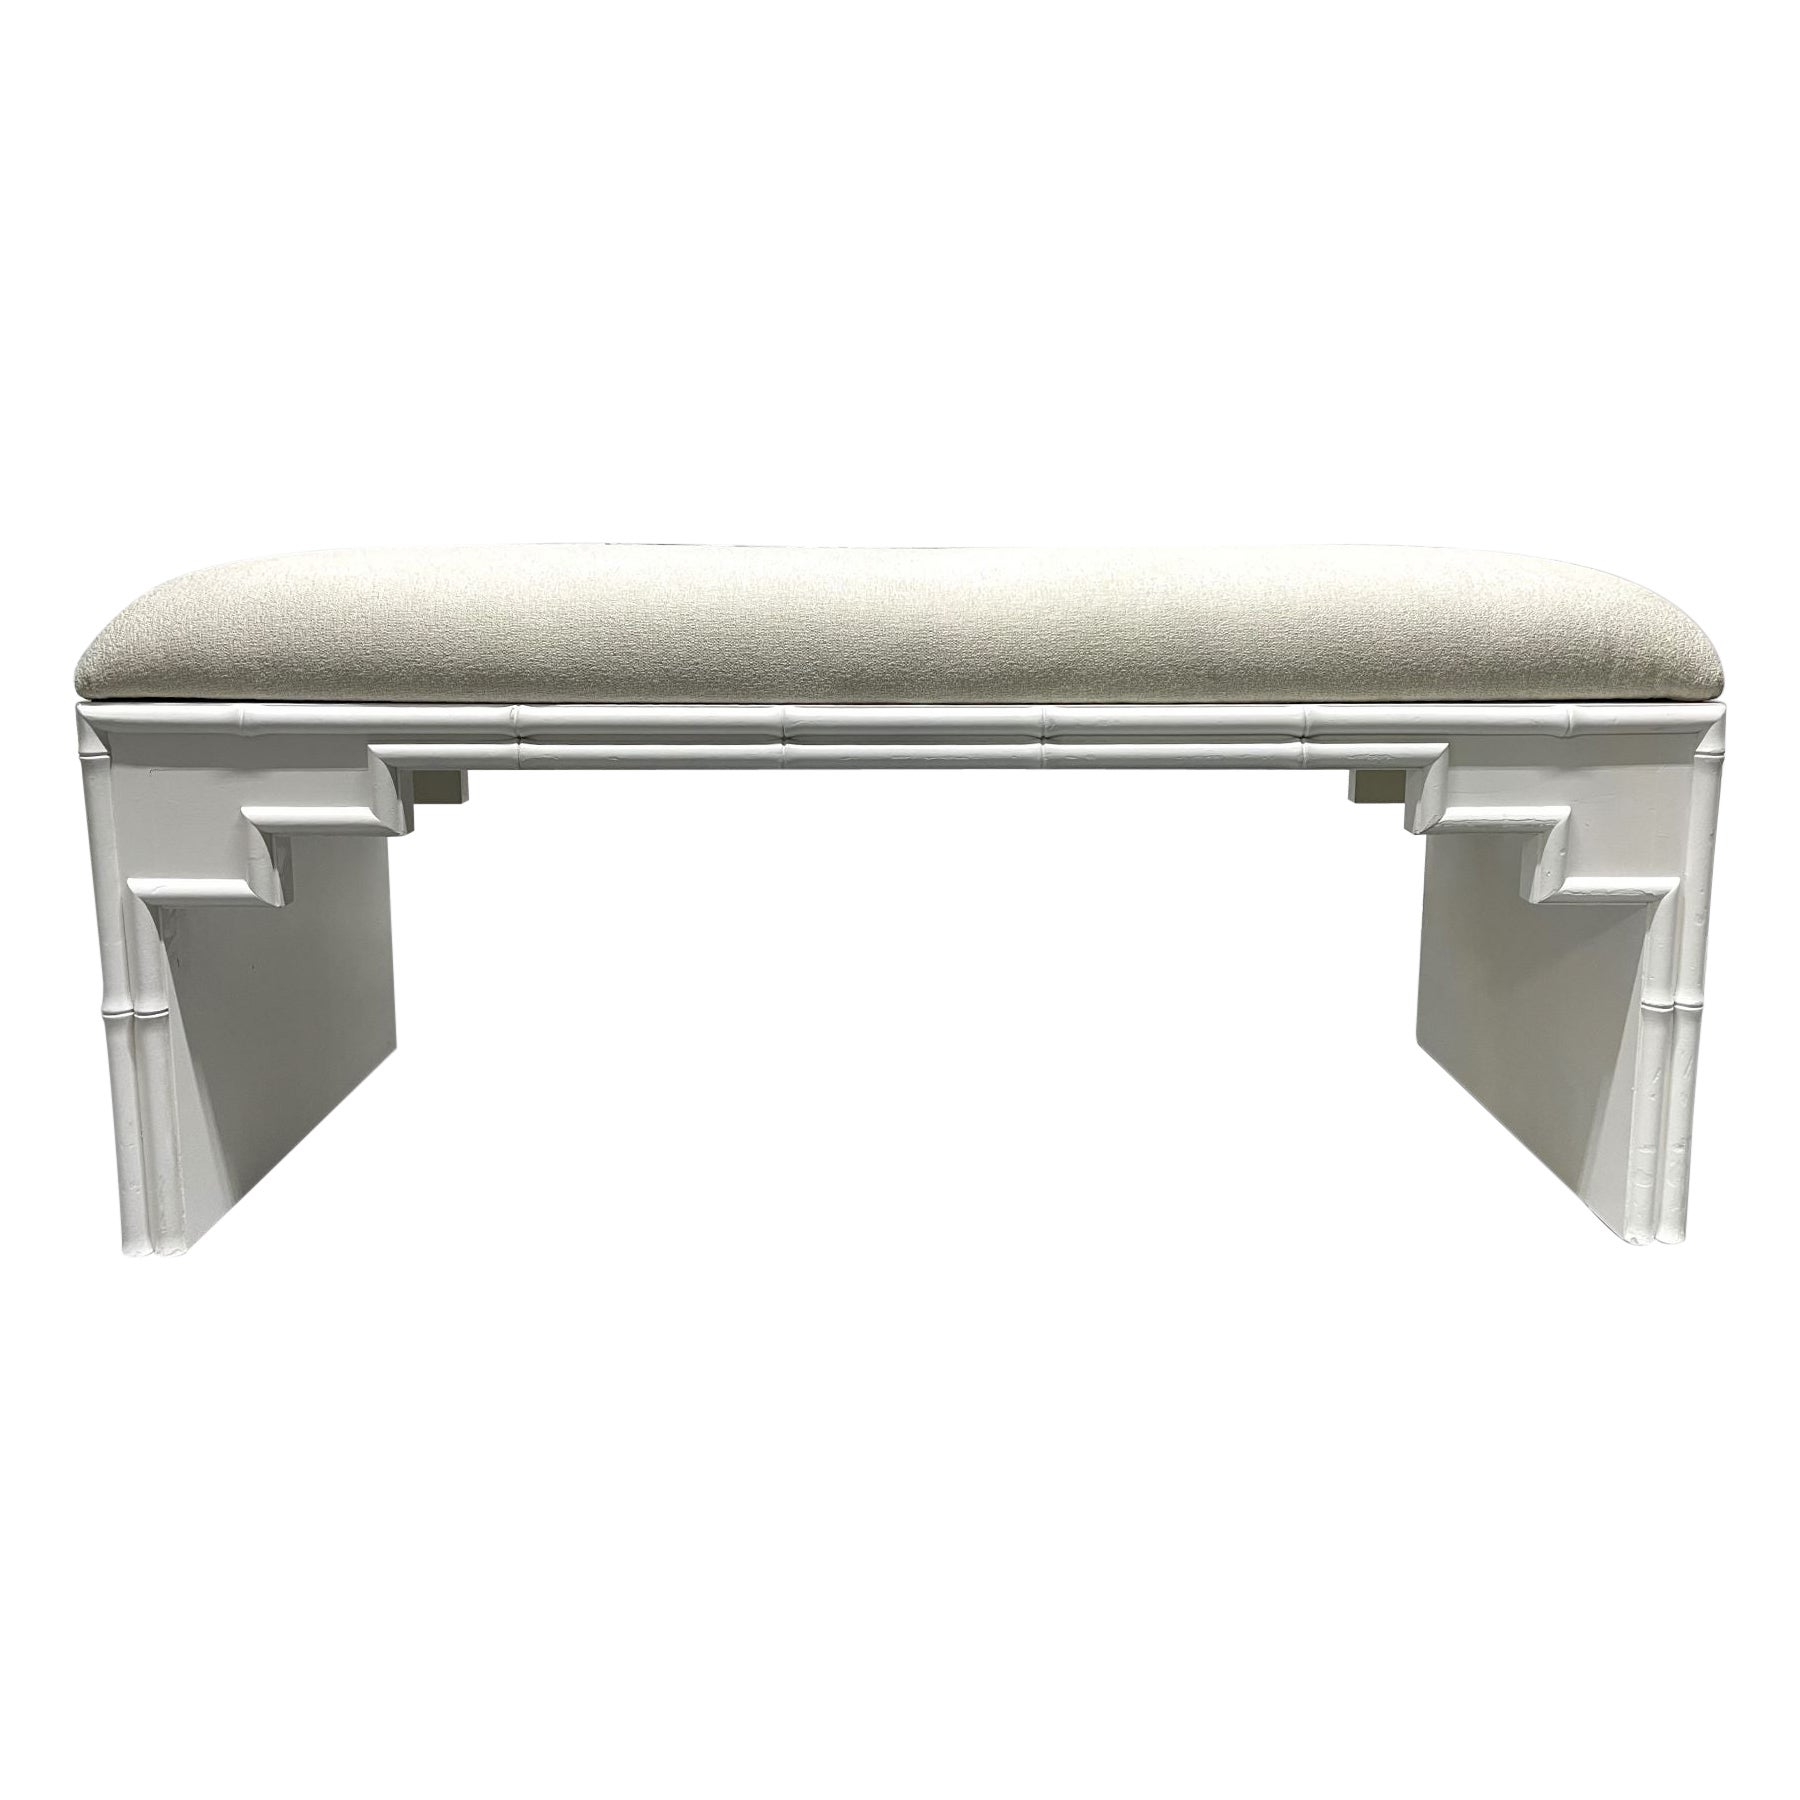 Hollywood Regency Faux Bamboo Upholstered Bench For Sale